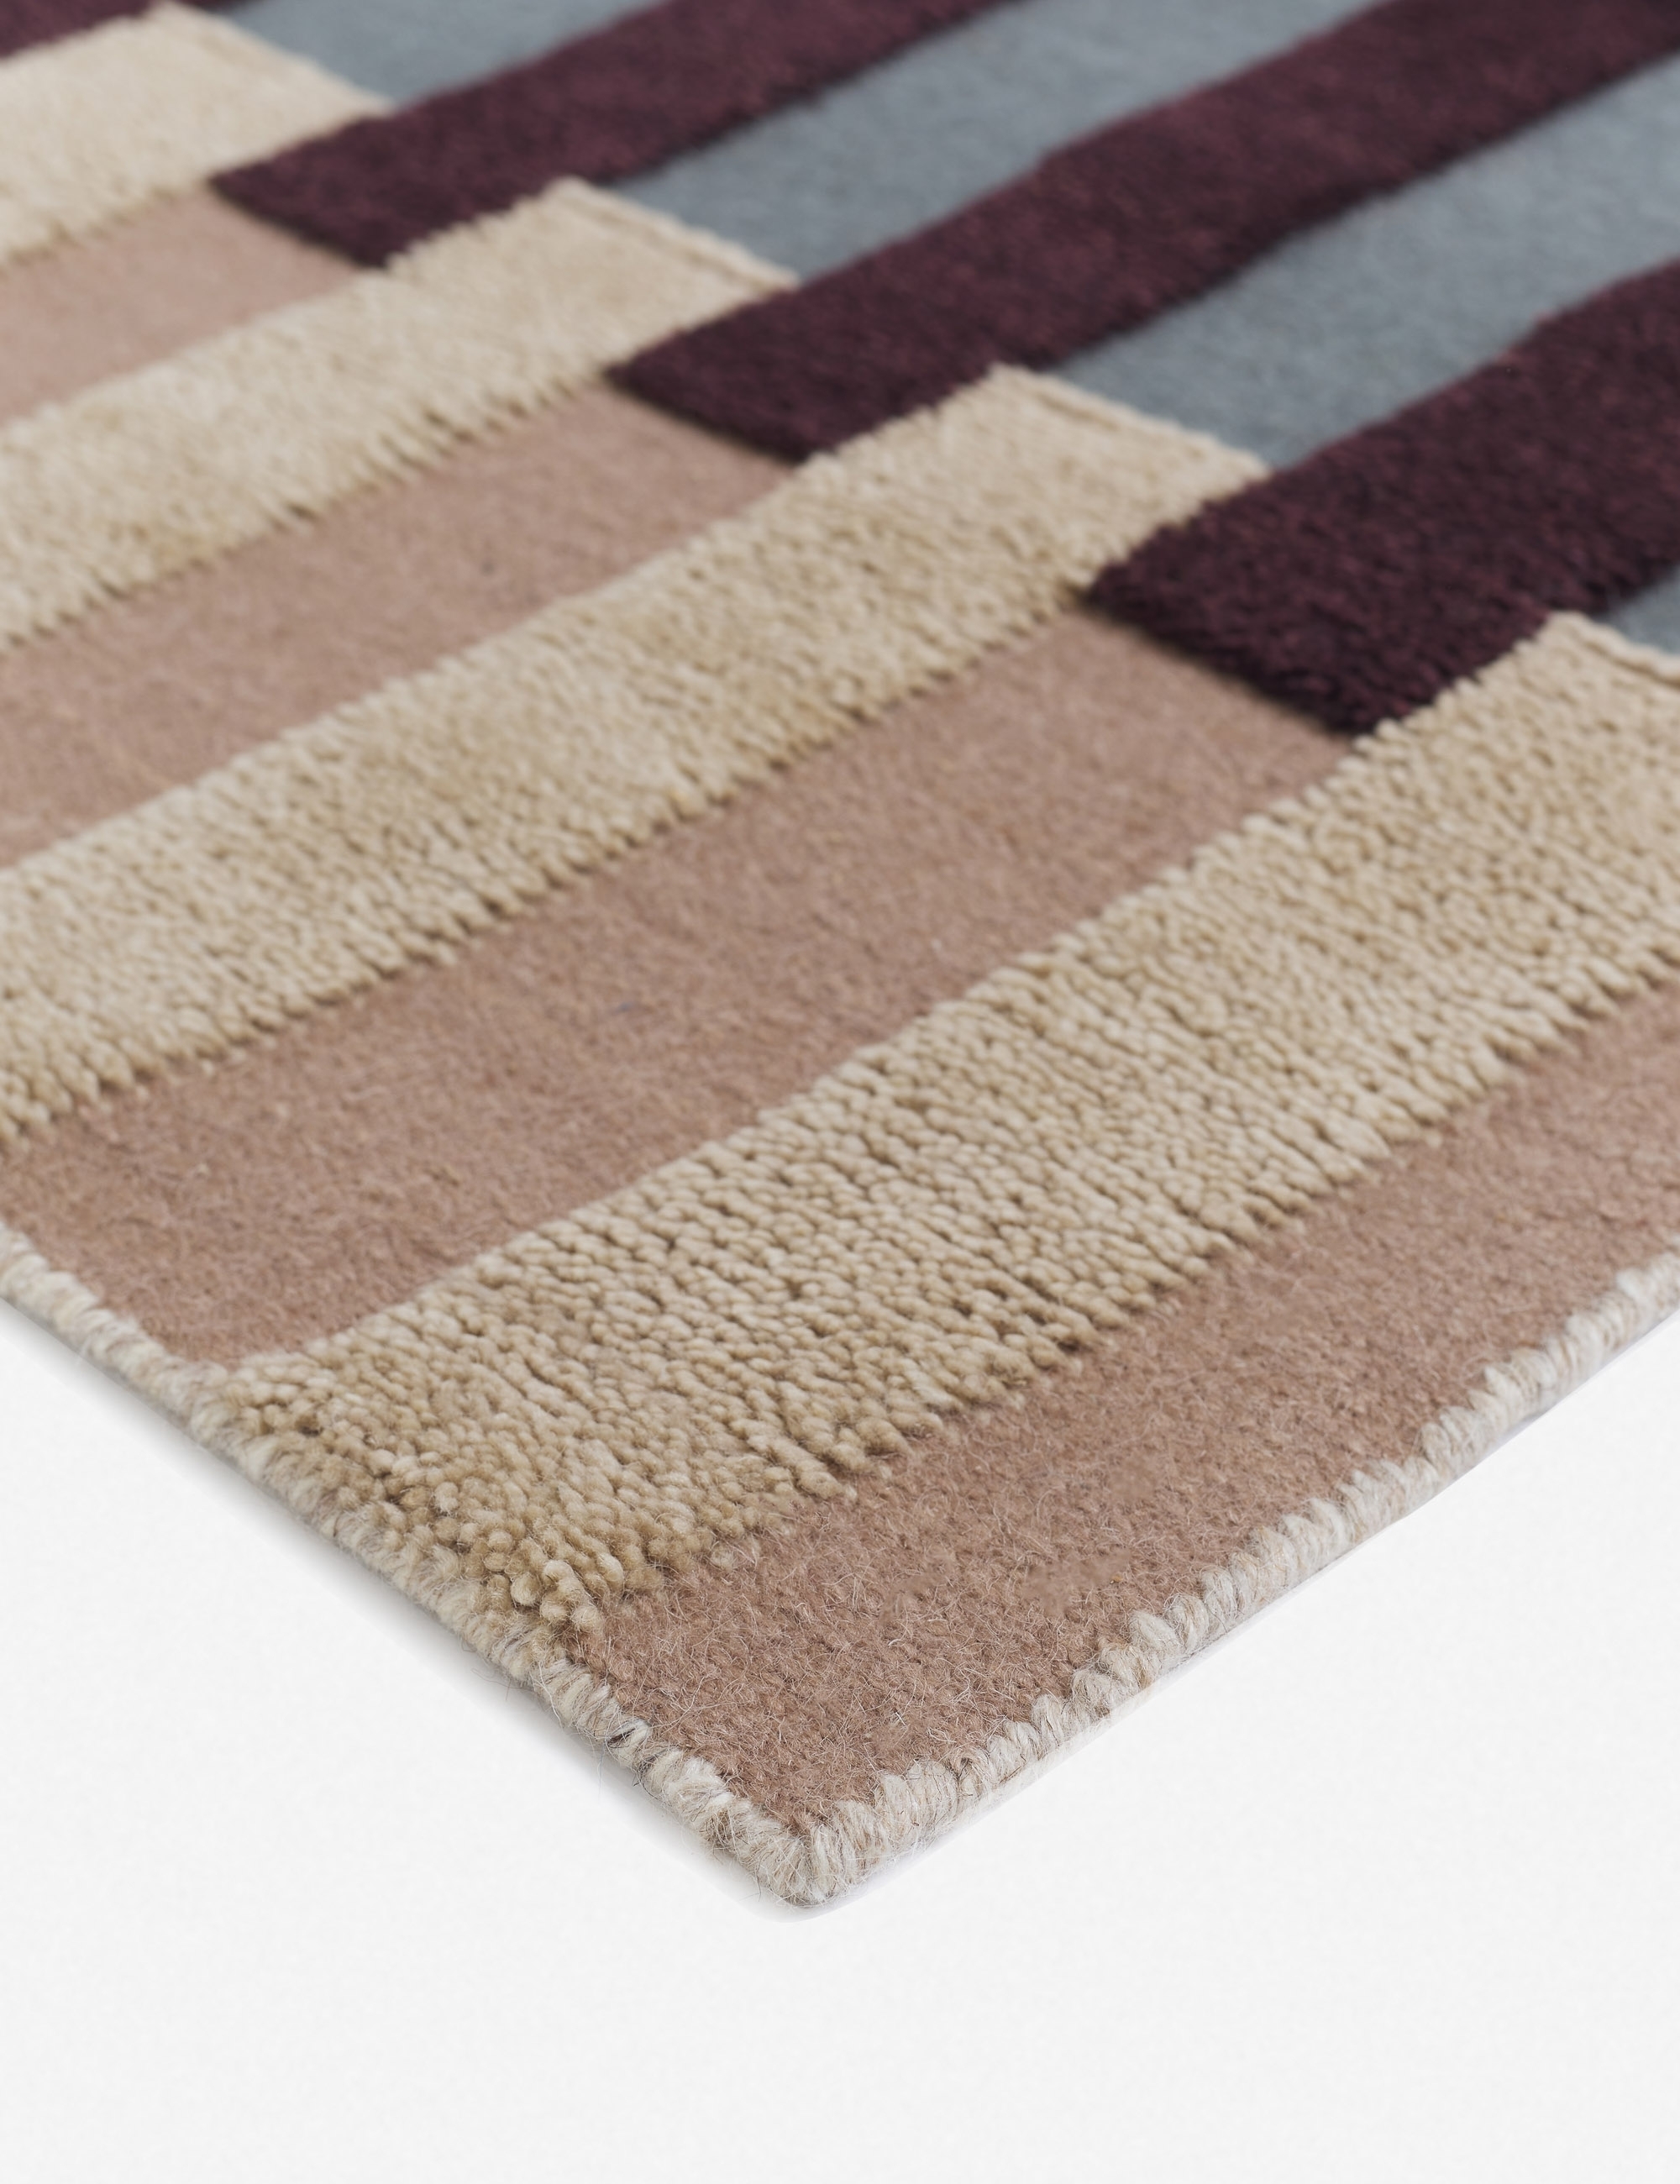 Otti Hand-Knotted Wool Rug by Nina Freudenberger - Image 6